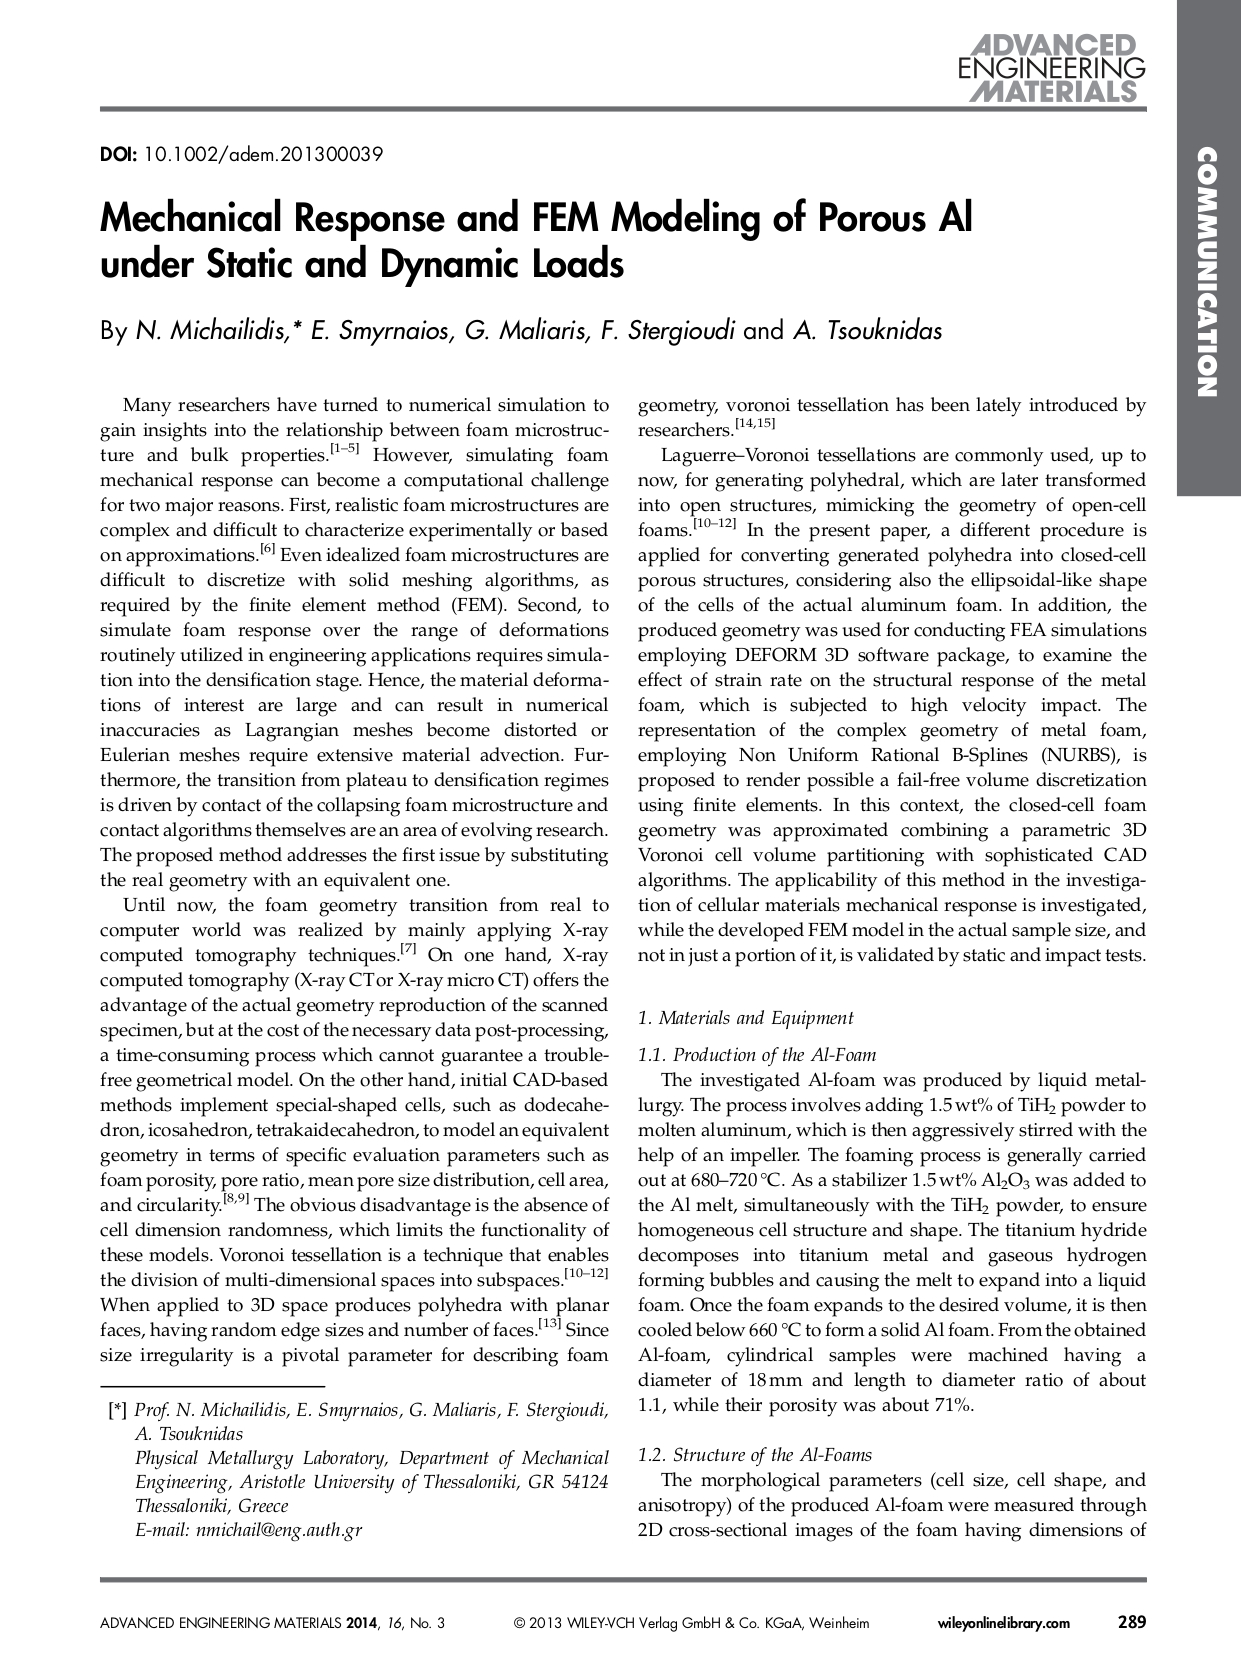 Mechanical response and FEM modeling of porous Al under static and dynamic loads_page-0001.jpg